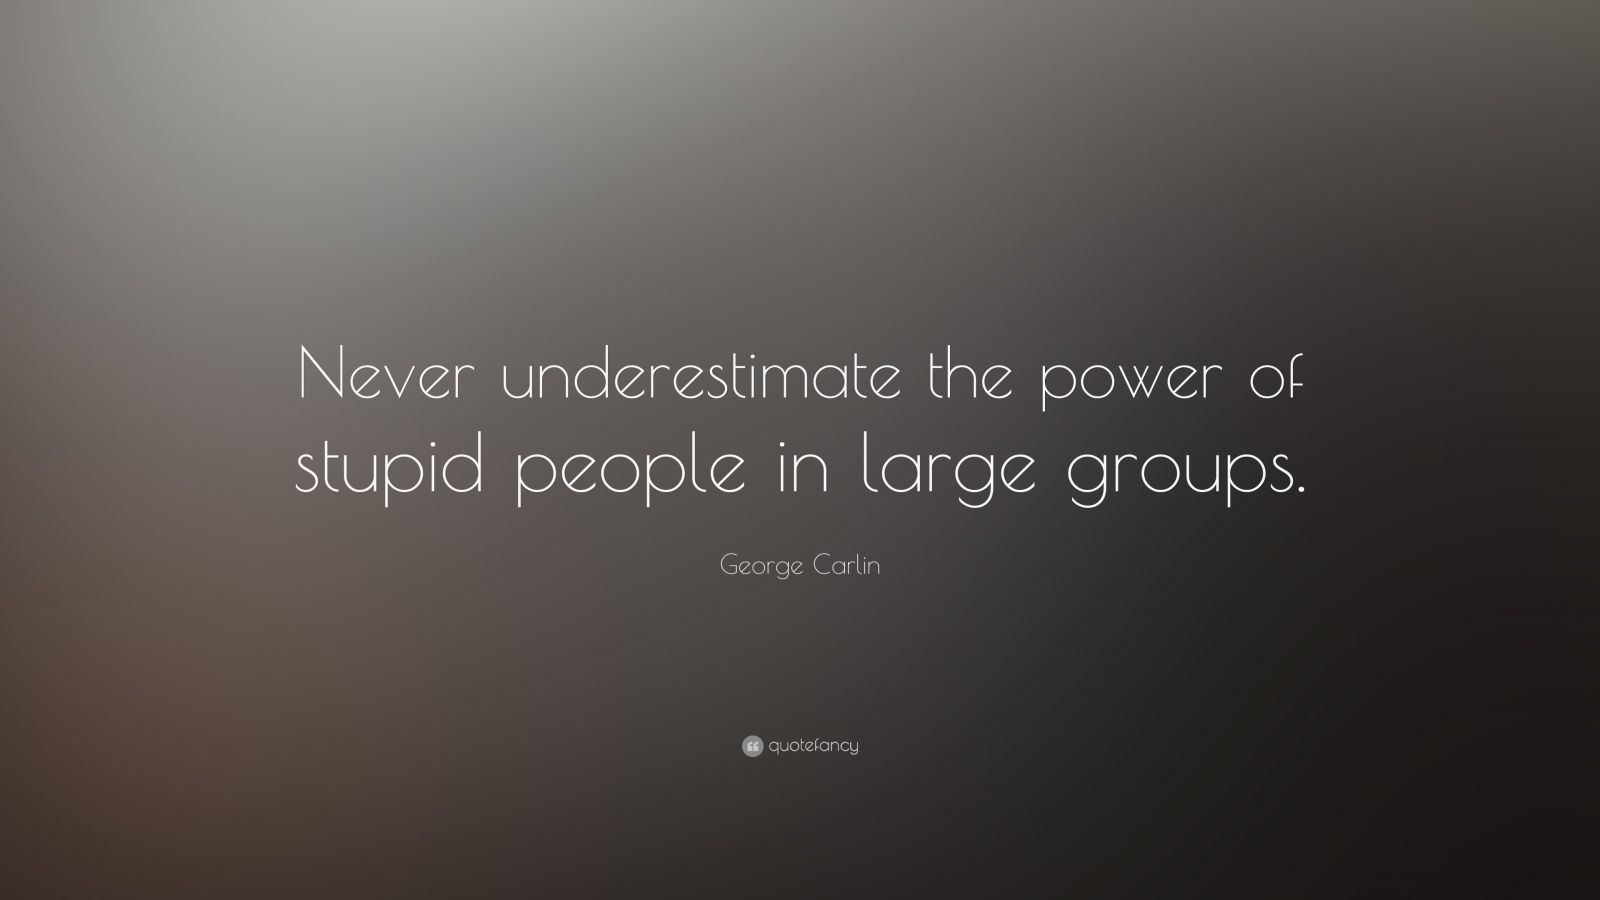 George Carlin Quote: “Never underestimate the power of stupid people in large groups.” (17 wallpaper)